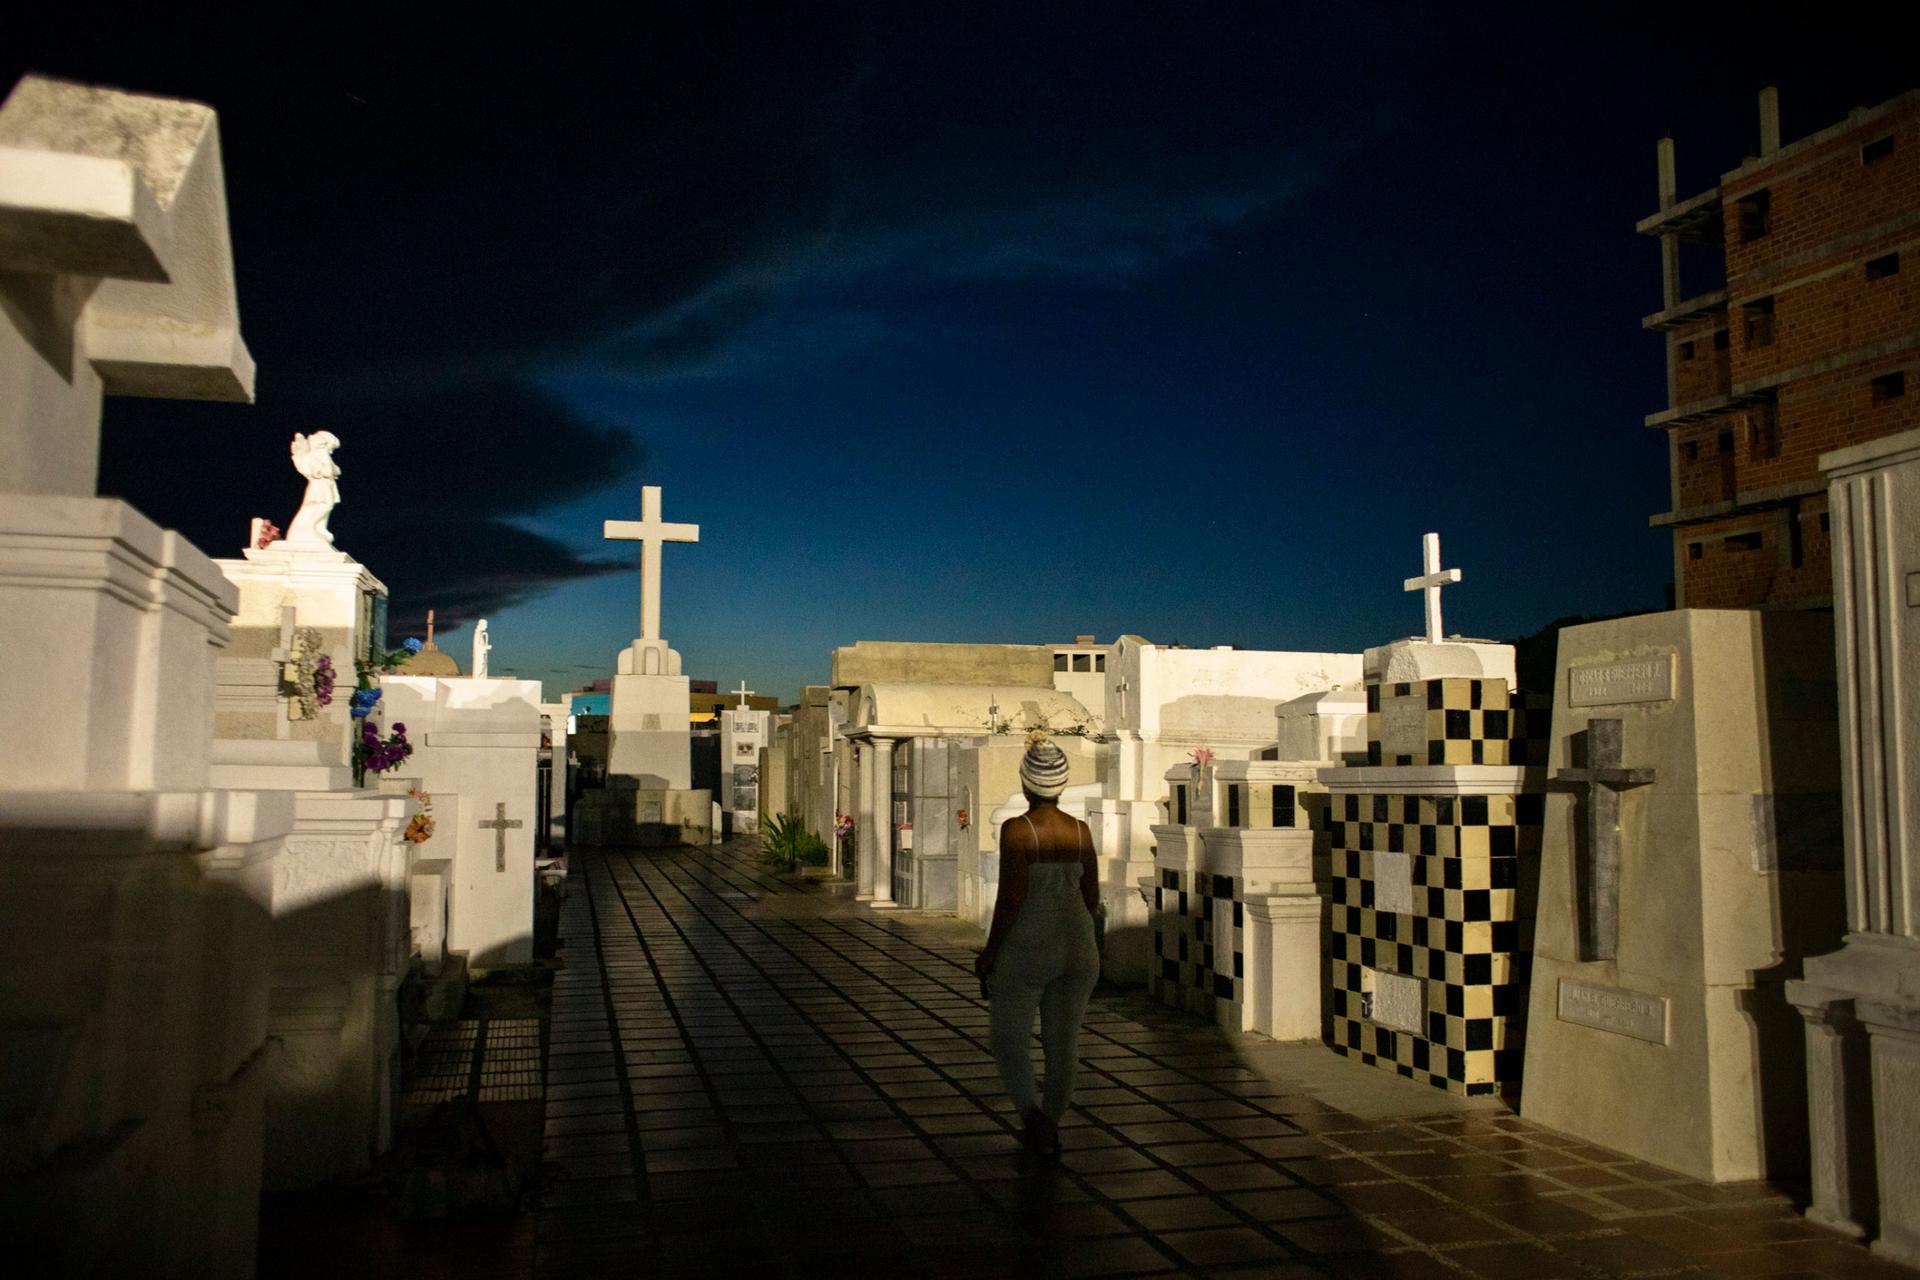 A woman is shown walking in an isle with large tombstones on either side and a white cross at the end.